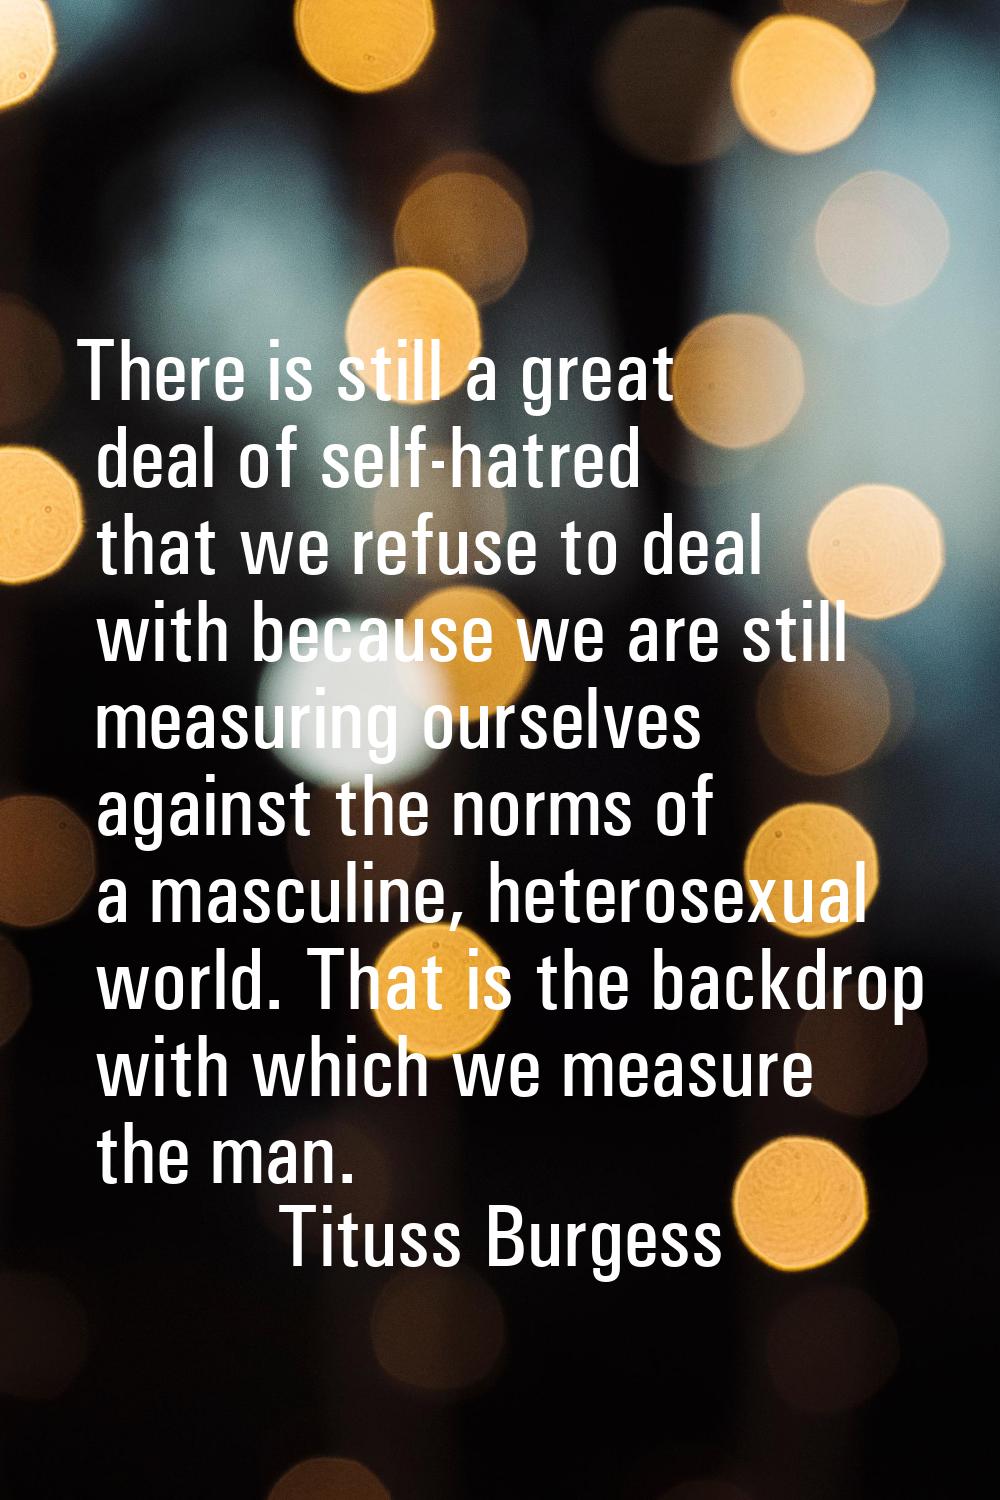 There is still a great deal of self-hatred that we refuse to deal with because we are still measuri